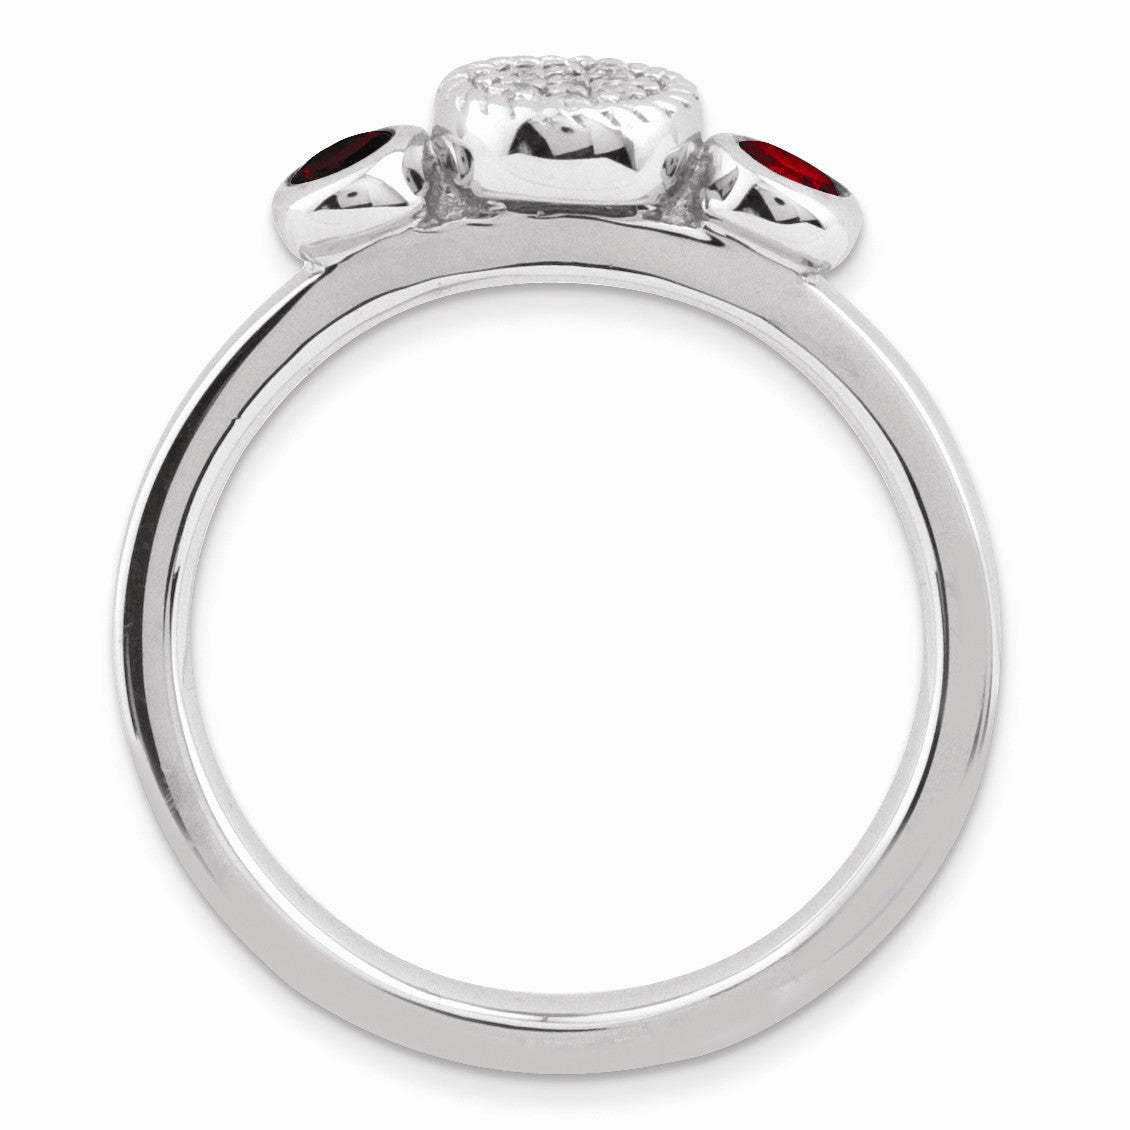 Alternate view of the Sterling Silver Stackable Garnet and Diamond Ring by The Black Bow Jewelry Co.